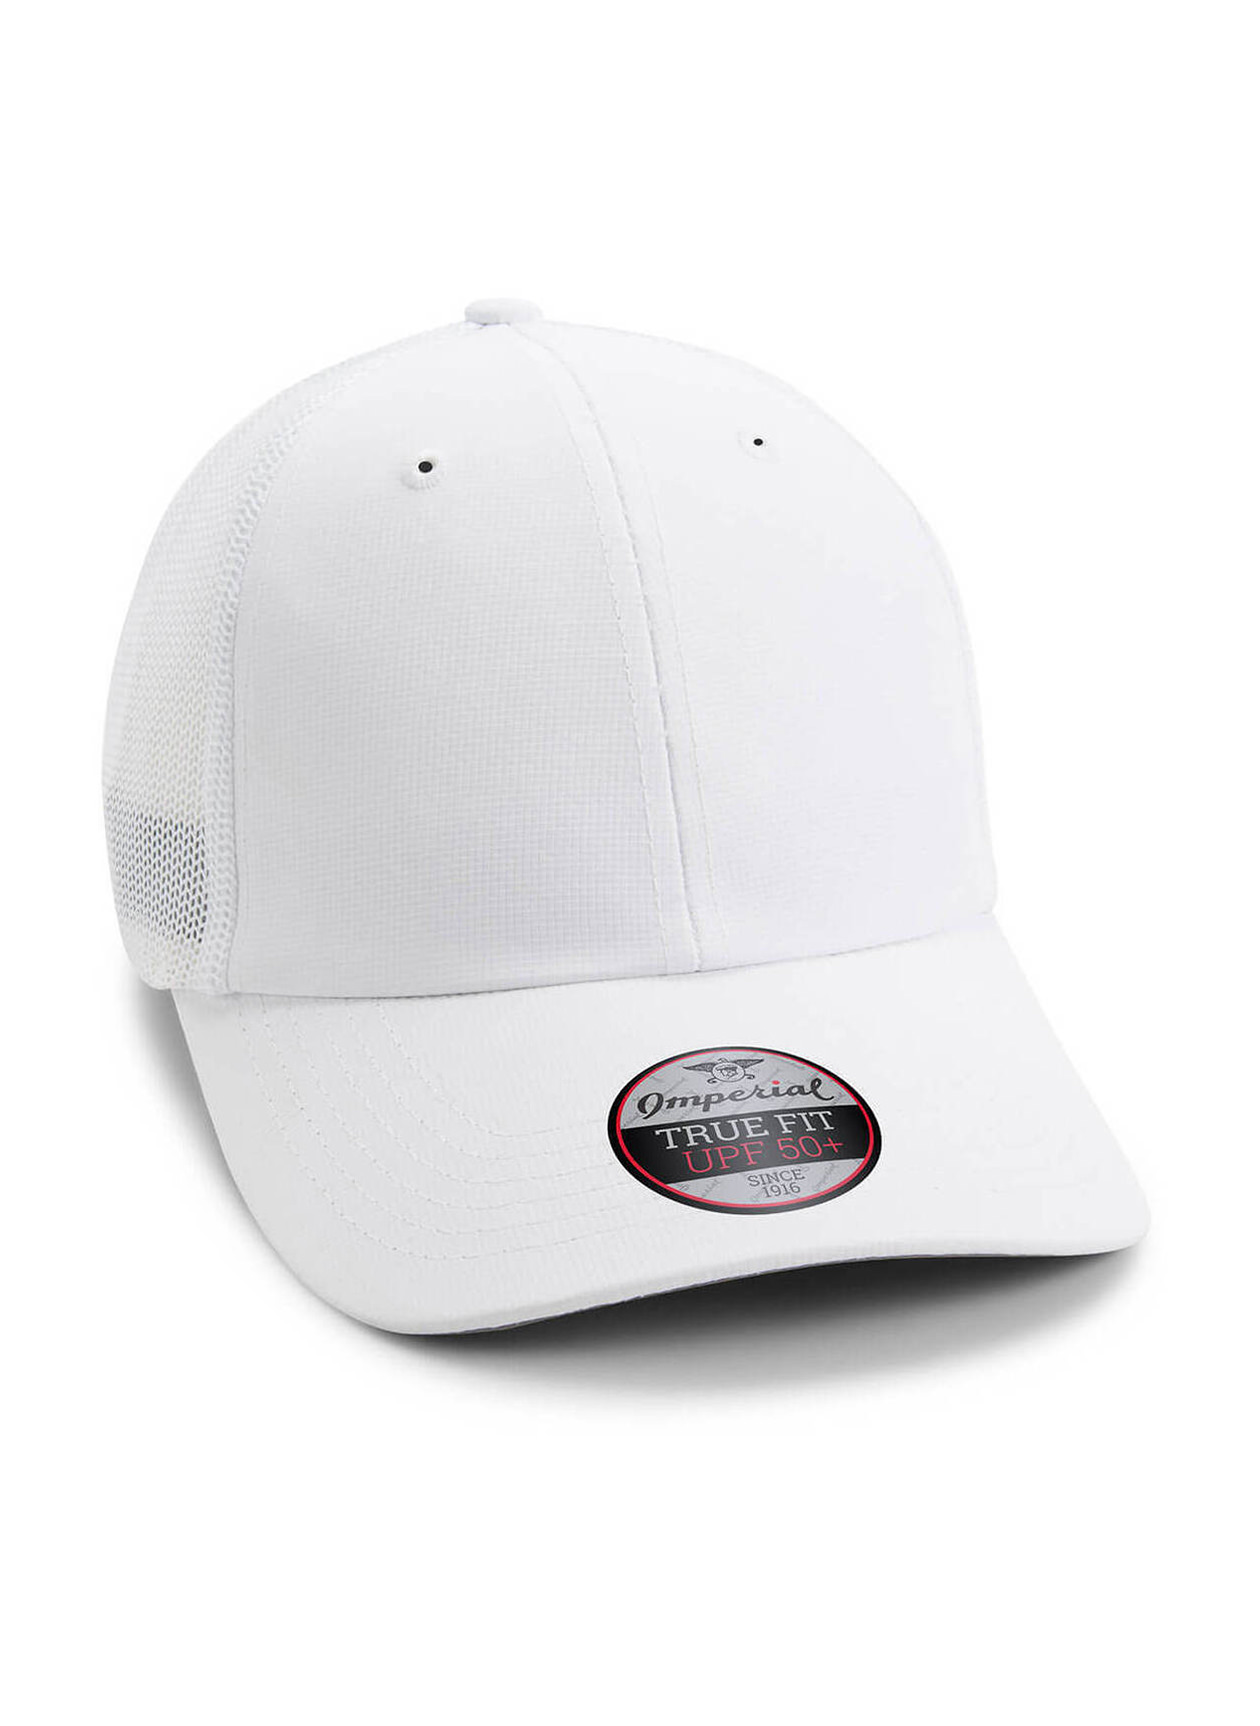 Imperial White Structured Performance Meshback Hat